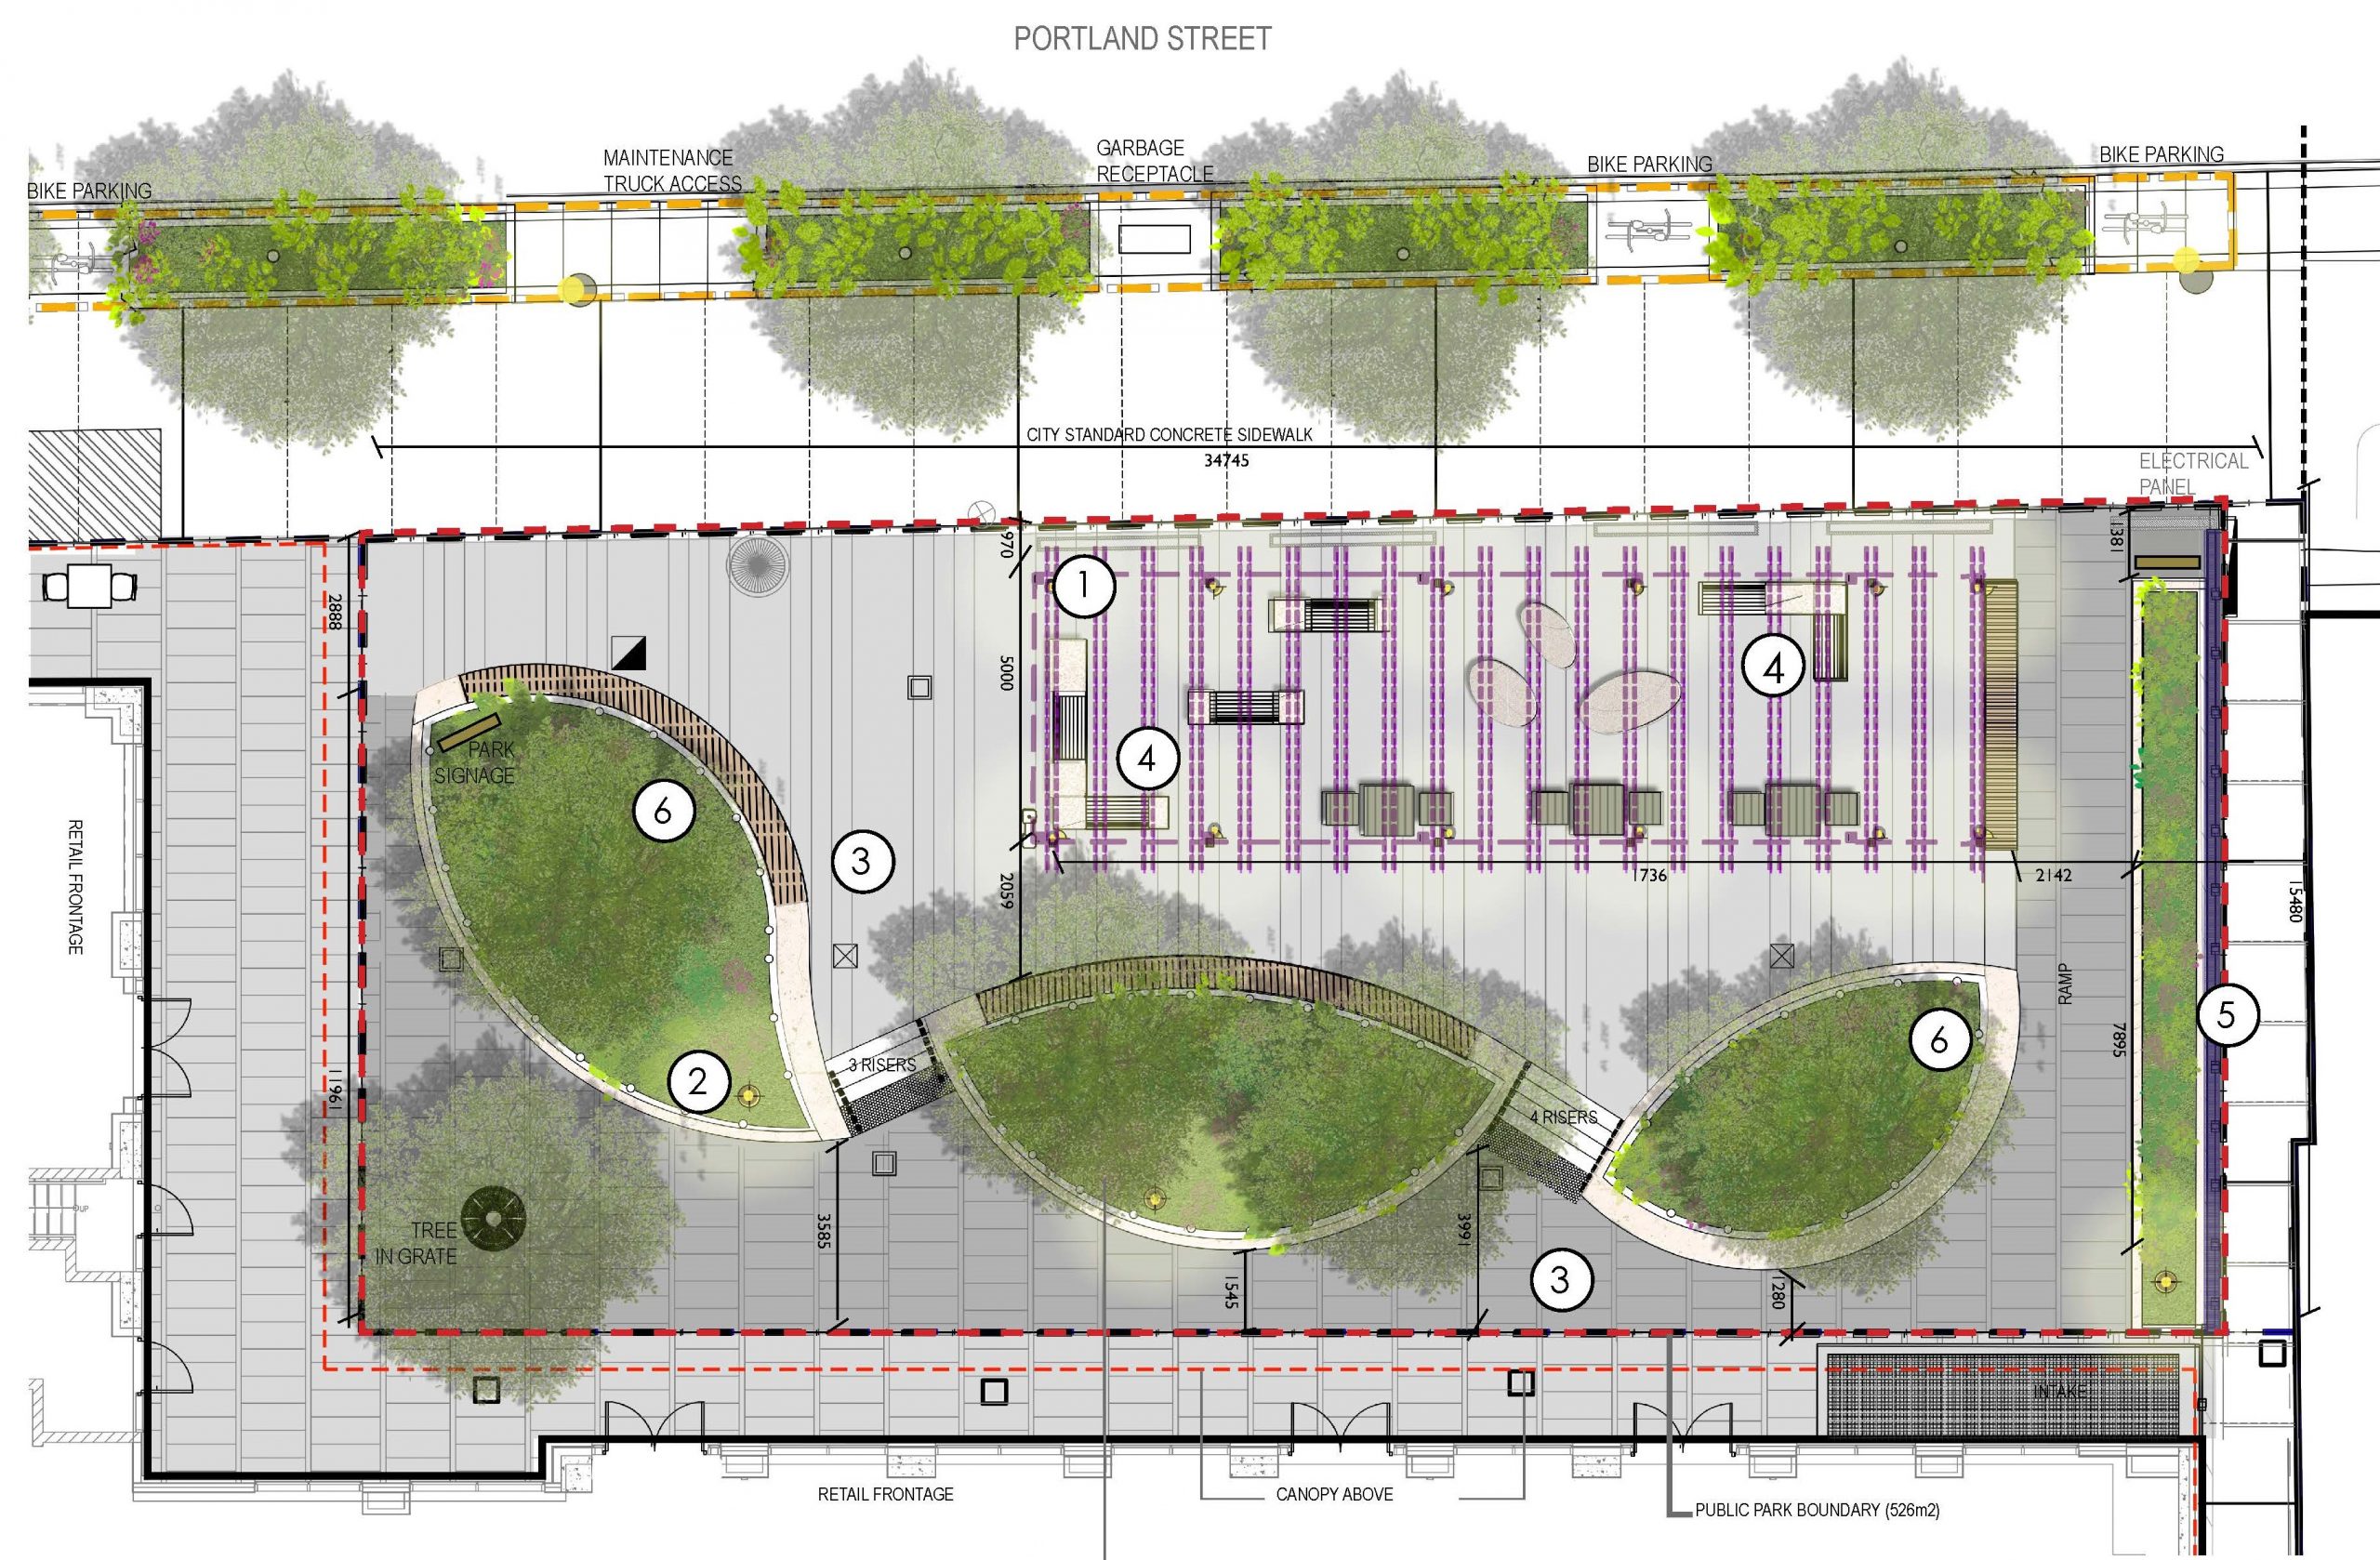 An aerial design plan for the new park at 134 Portland Street, with numbered labels indicating the location of six features, which are listed in the legend below. The trees and plants are located on the centre and the north perimeter of the park, seating areas and paving are located throughout the park. 